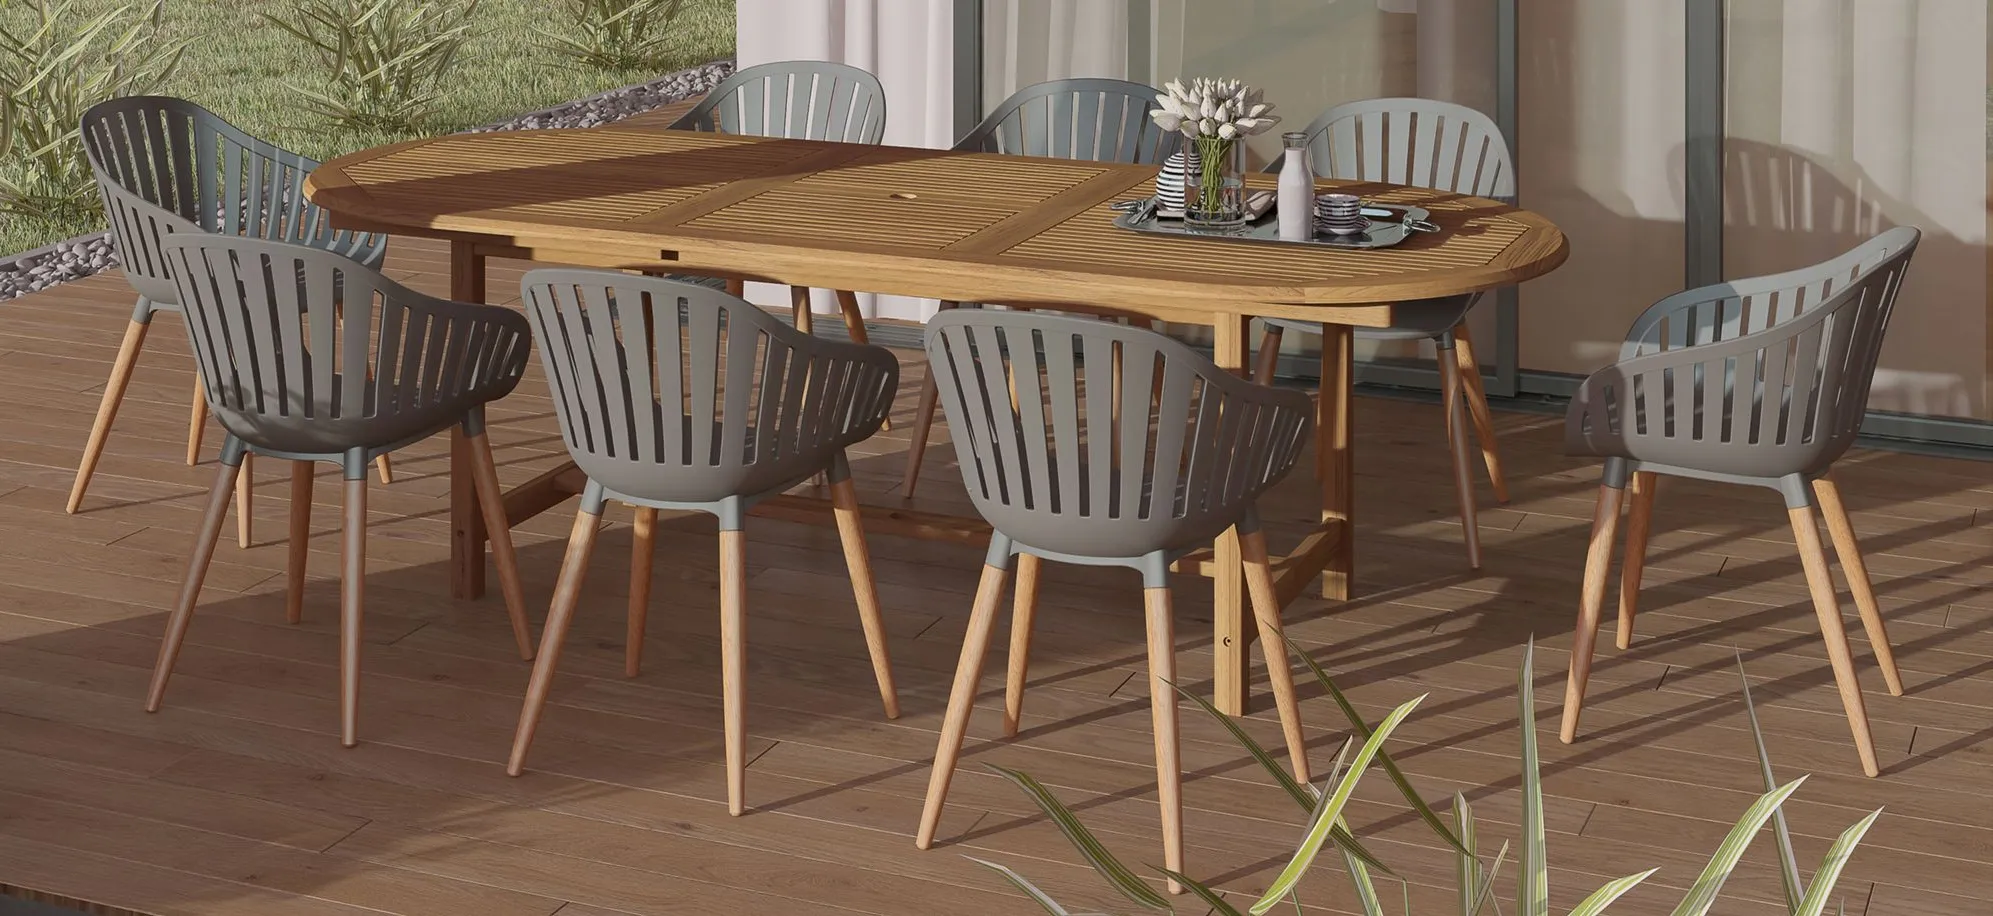 Amazonia Outdoor 9-pc. Oval Patio Dining Table Set w/ Eucalyptus Chairs in Brown by International Home Miami